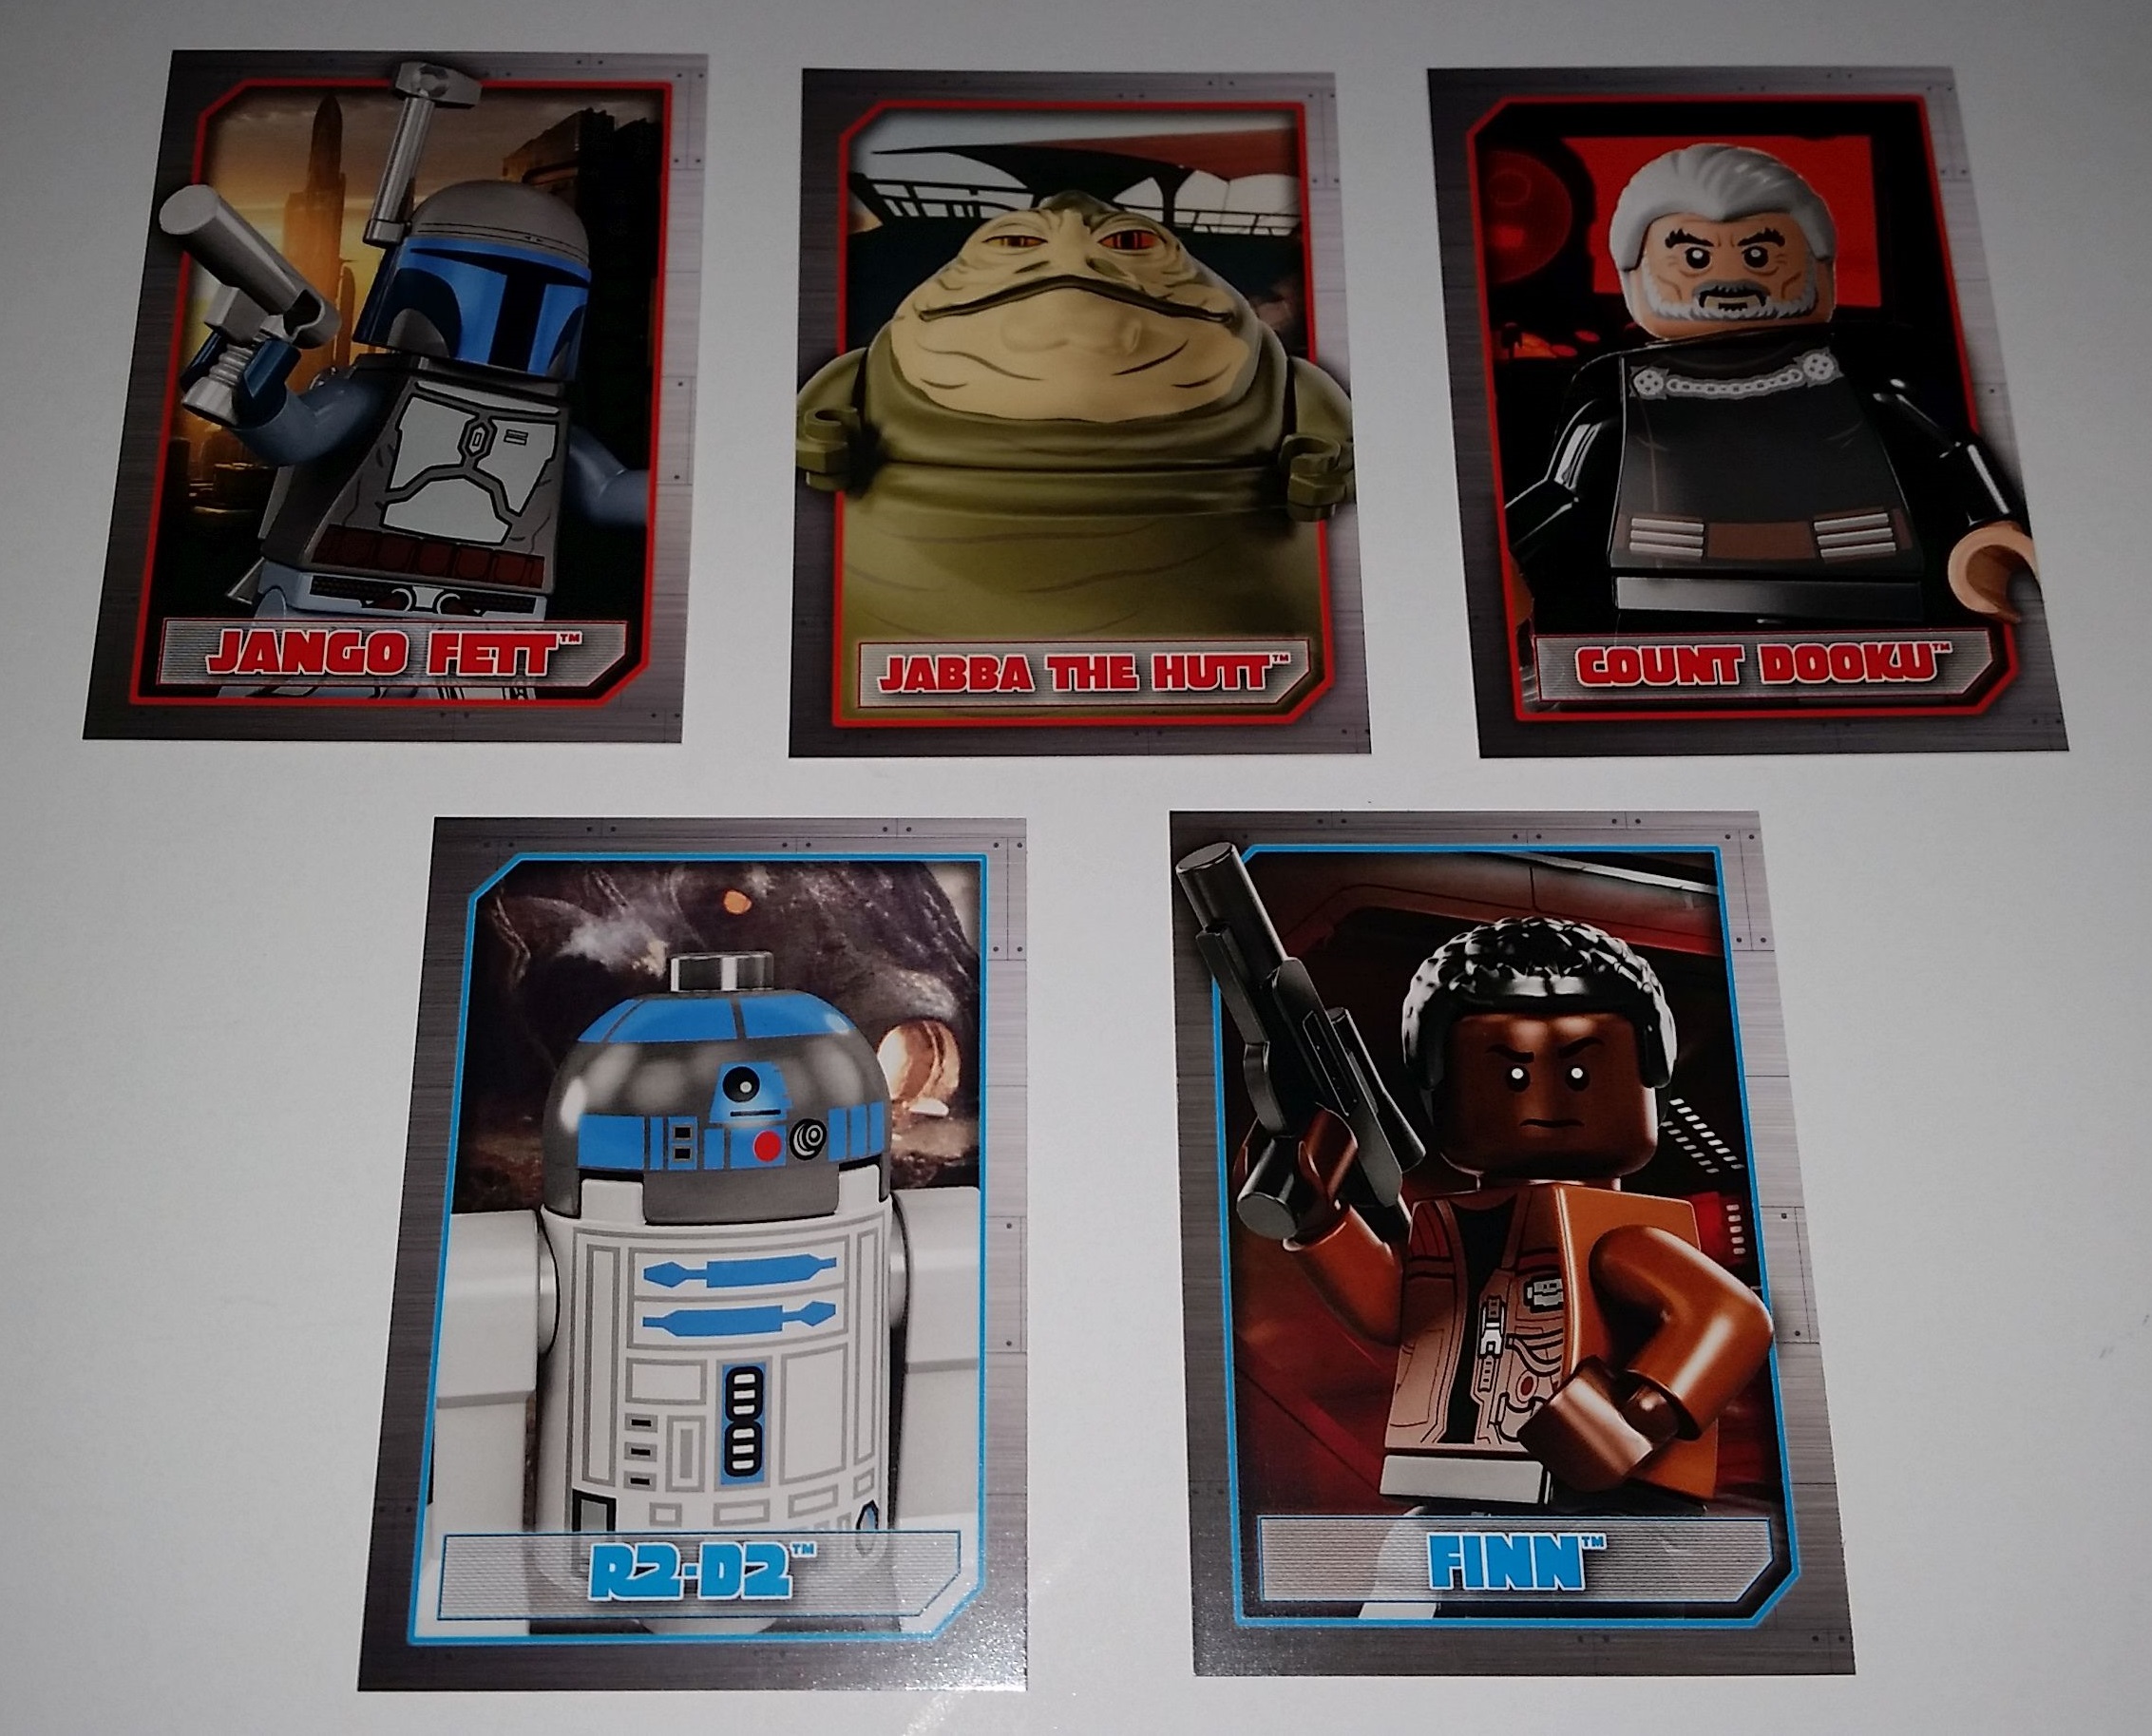 Lego ® Star Wars ™ Series 1 TRADING CARDS CARD 62-RO-GR 